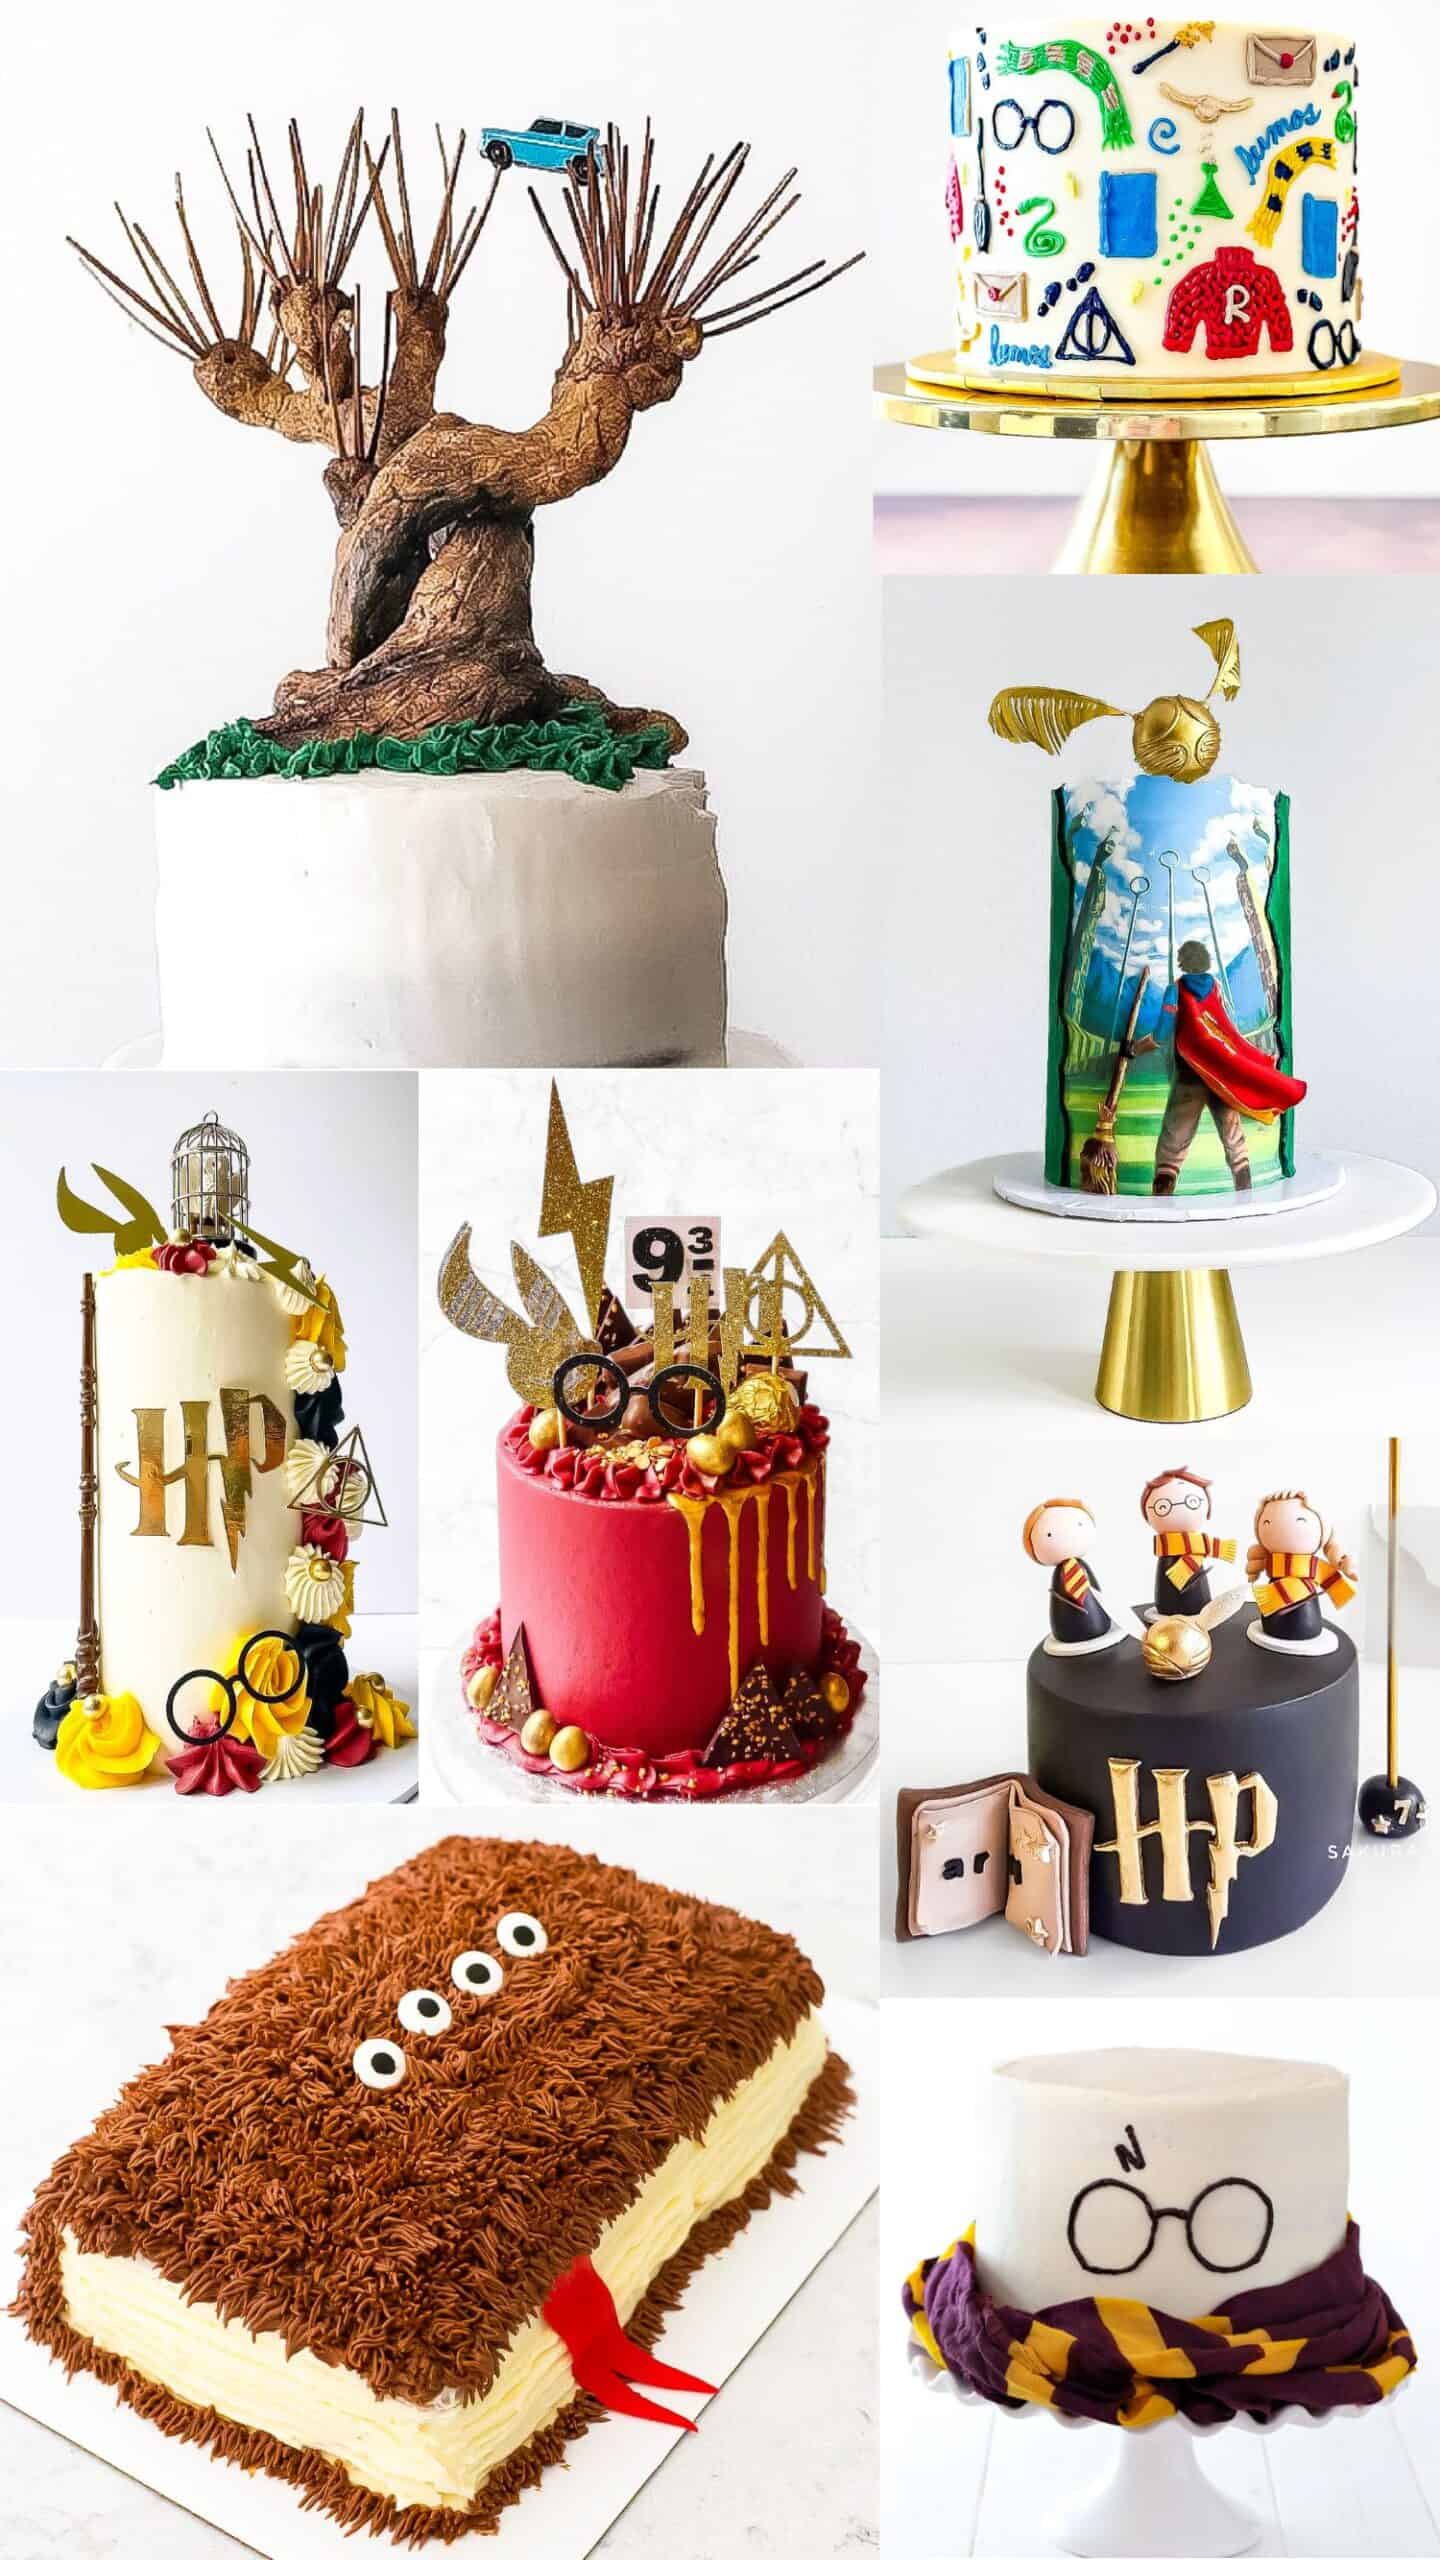 Harry potter cake ideas collage with the monster book of monsters, a black cake with Harry, ron and Hermione, A Whomping Willow cake and more